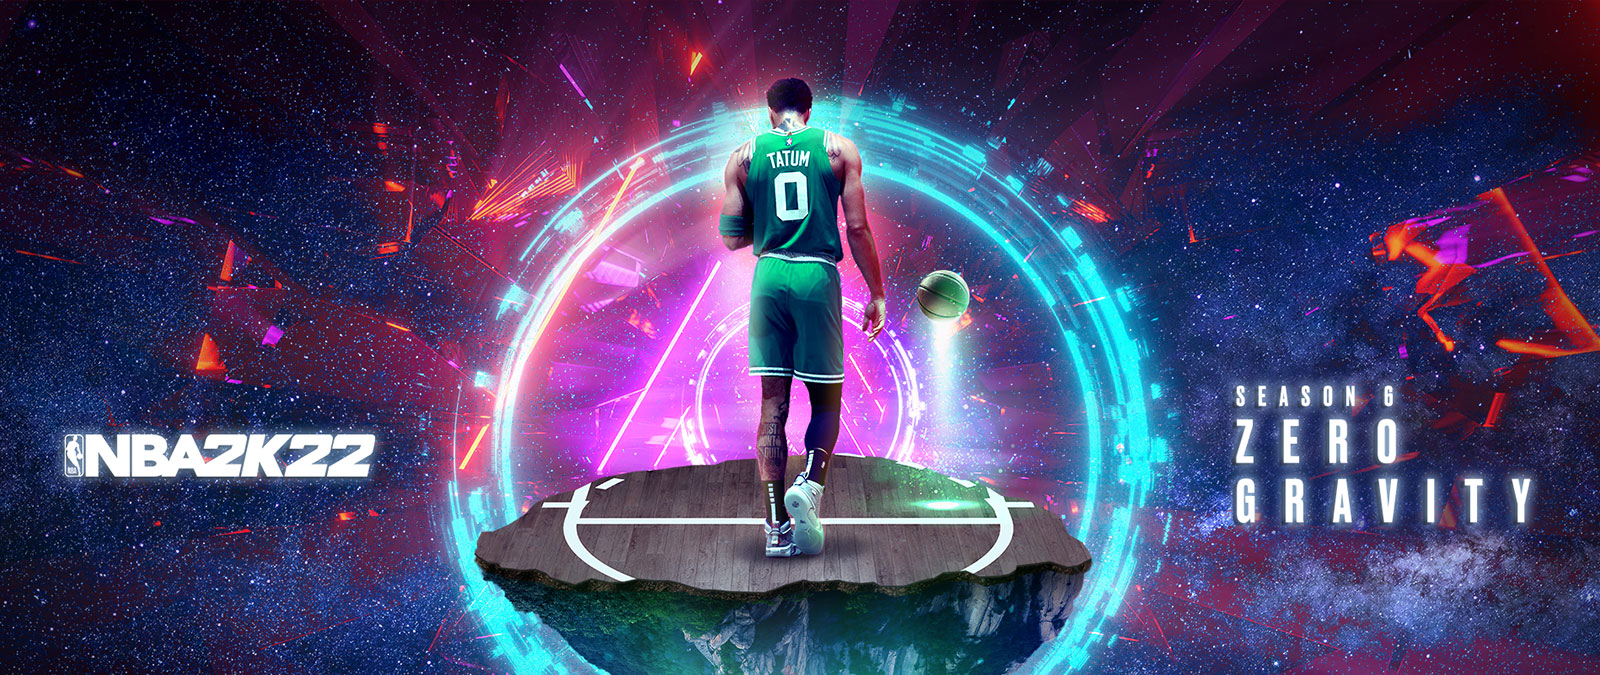 NBA 2K22, Season 6 Zero Gravity, Tatum stands on a floating piece of a basketball court in space with rings of energy surrounding him.